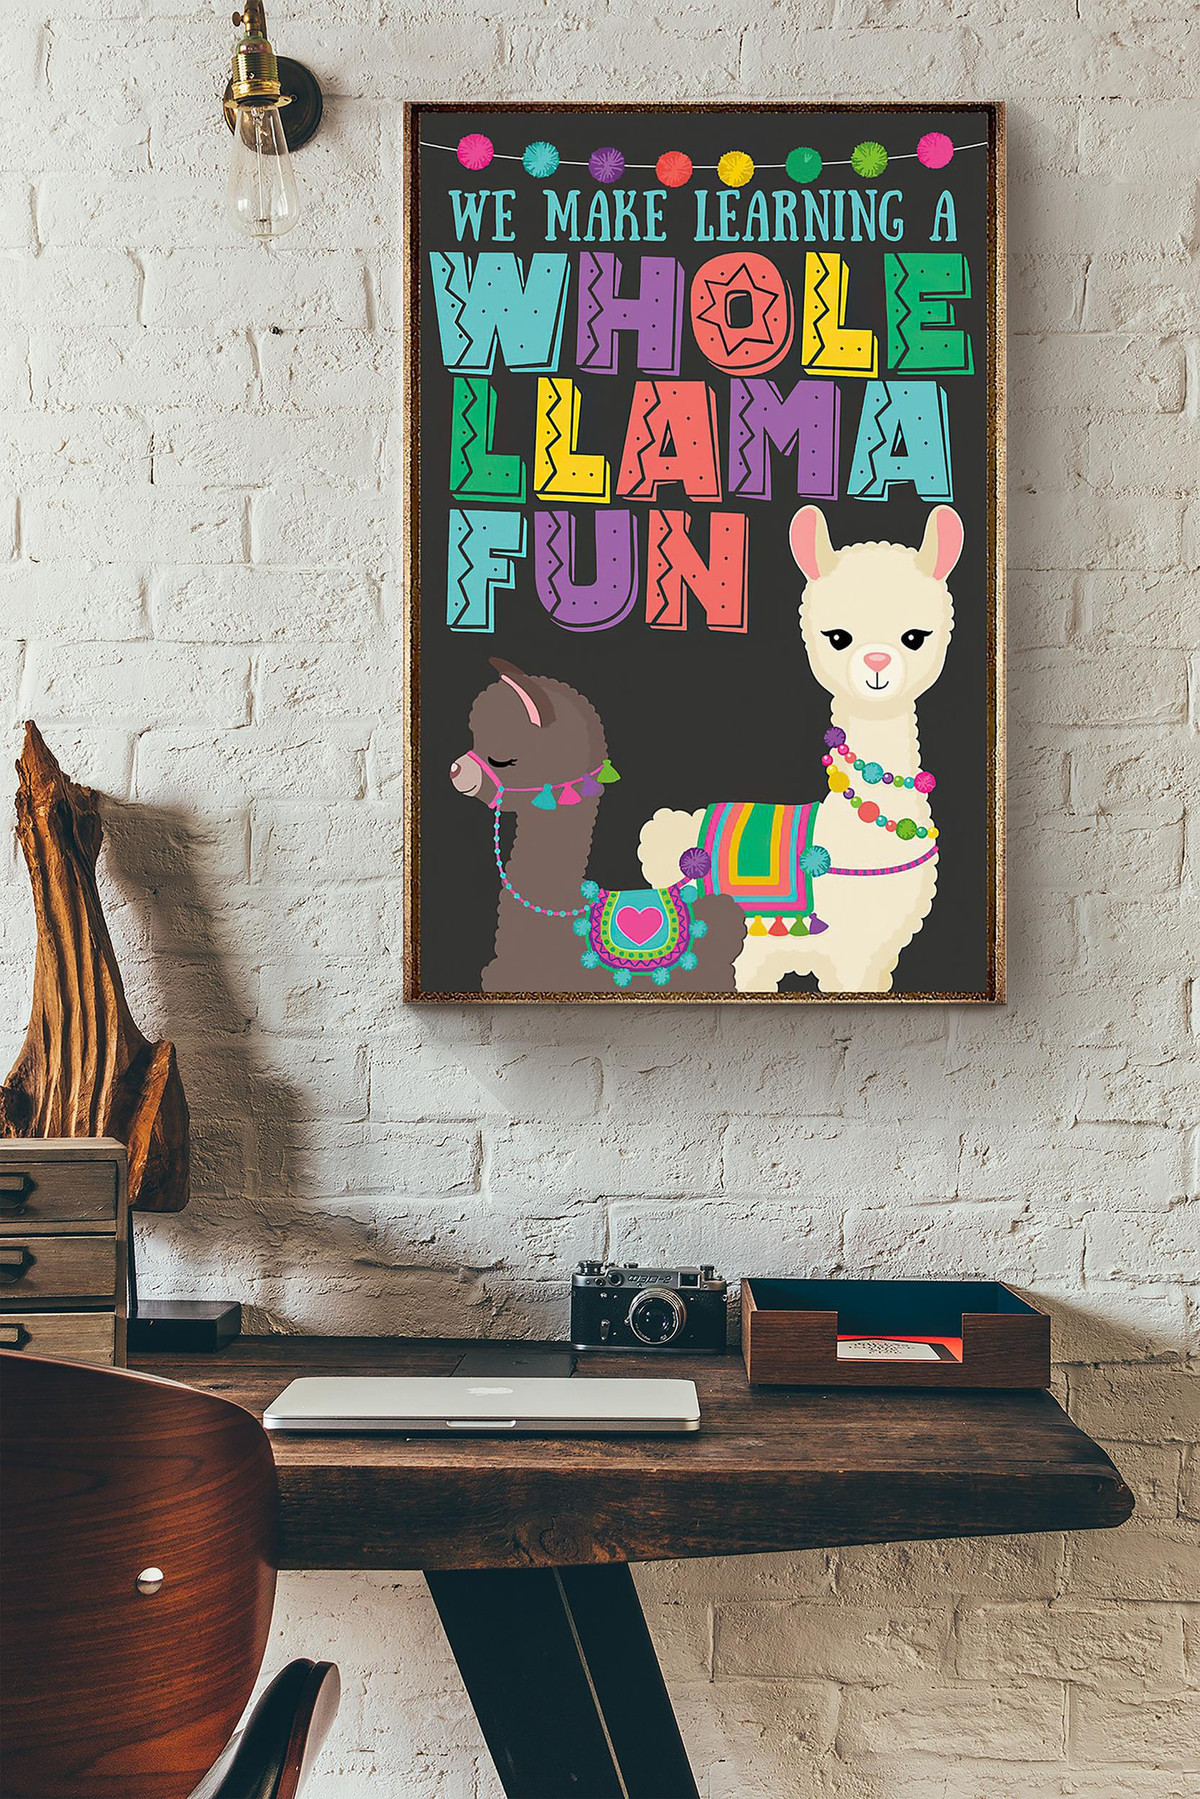 We Make Learning A Whole Llama Fun Teacher Canvas Painting Ideas, Canvas Hanging Prints, Gift Idea Framed Prints, Canvas Paintings Wrapped Canvas 8x10